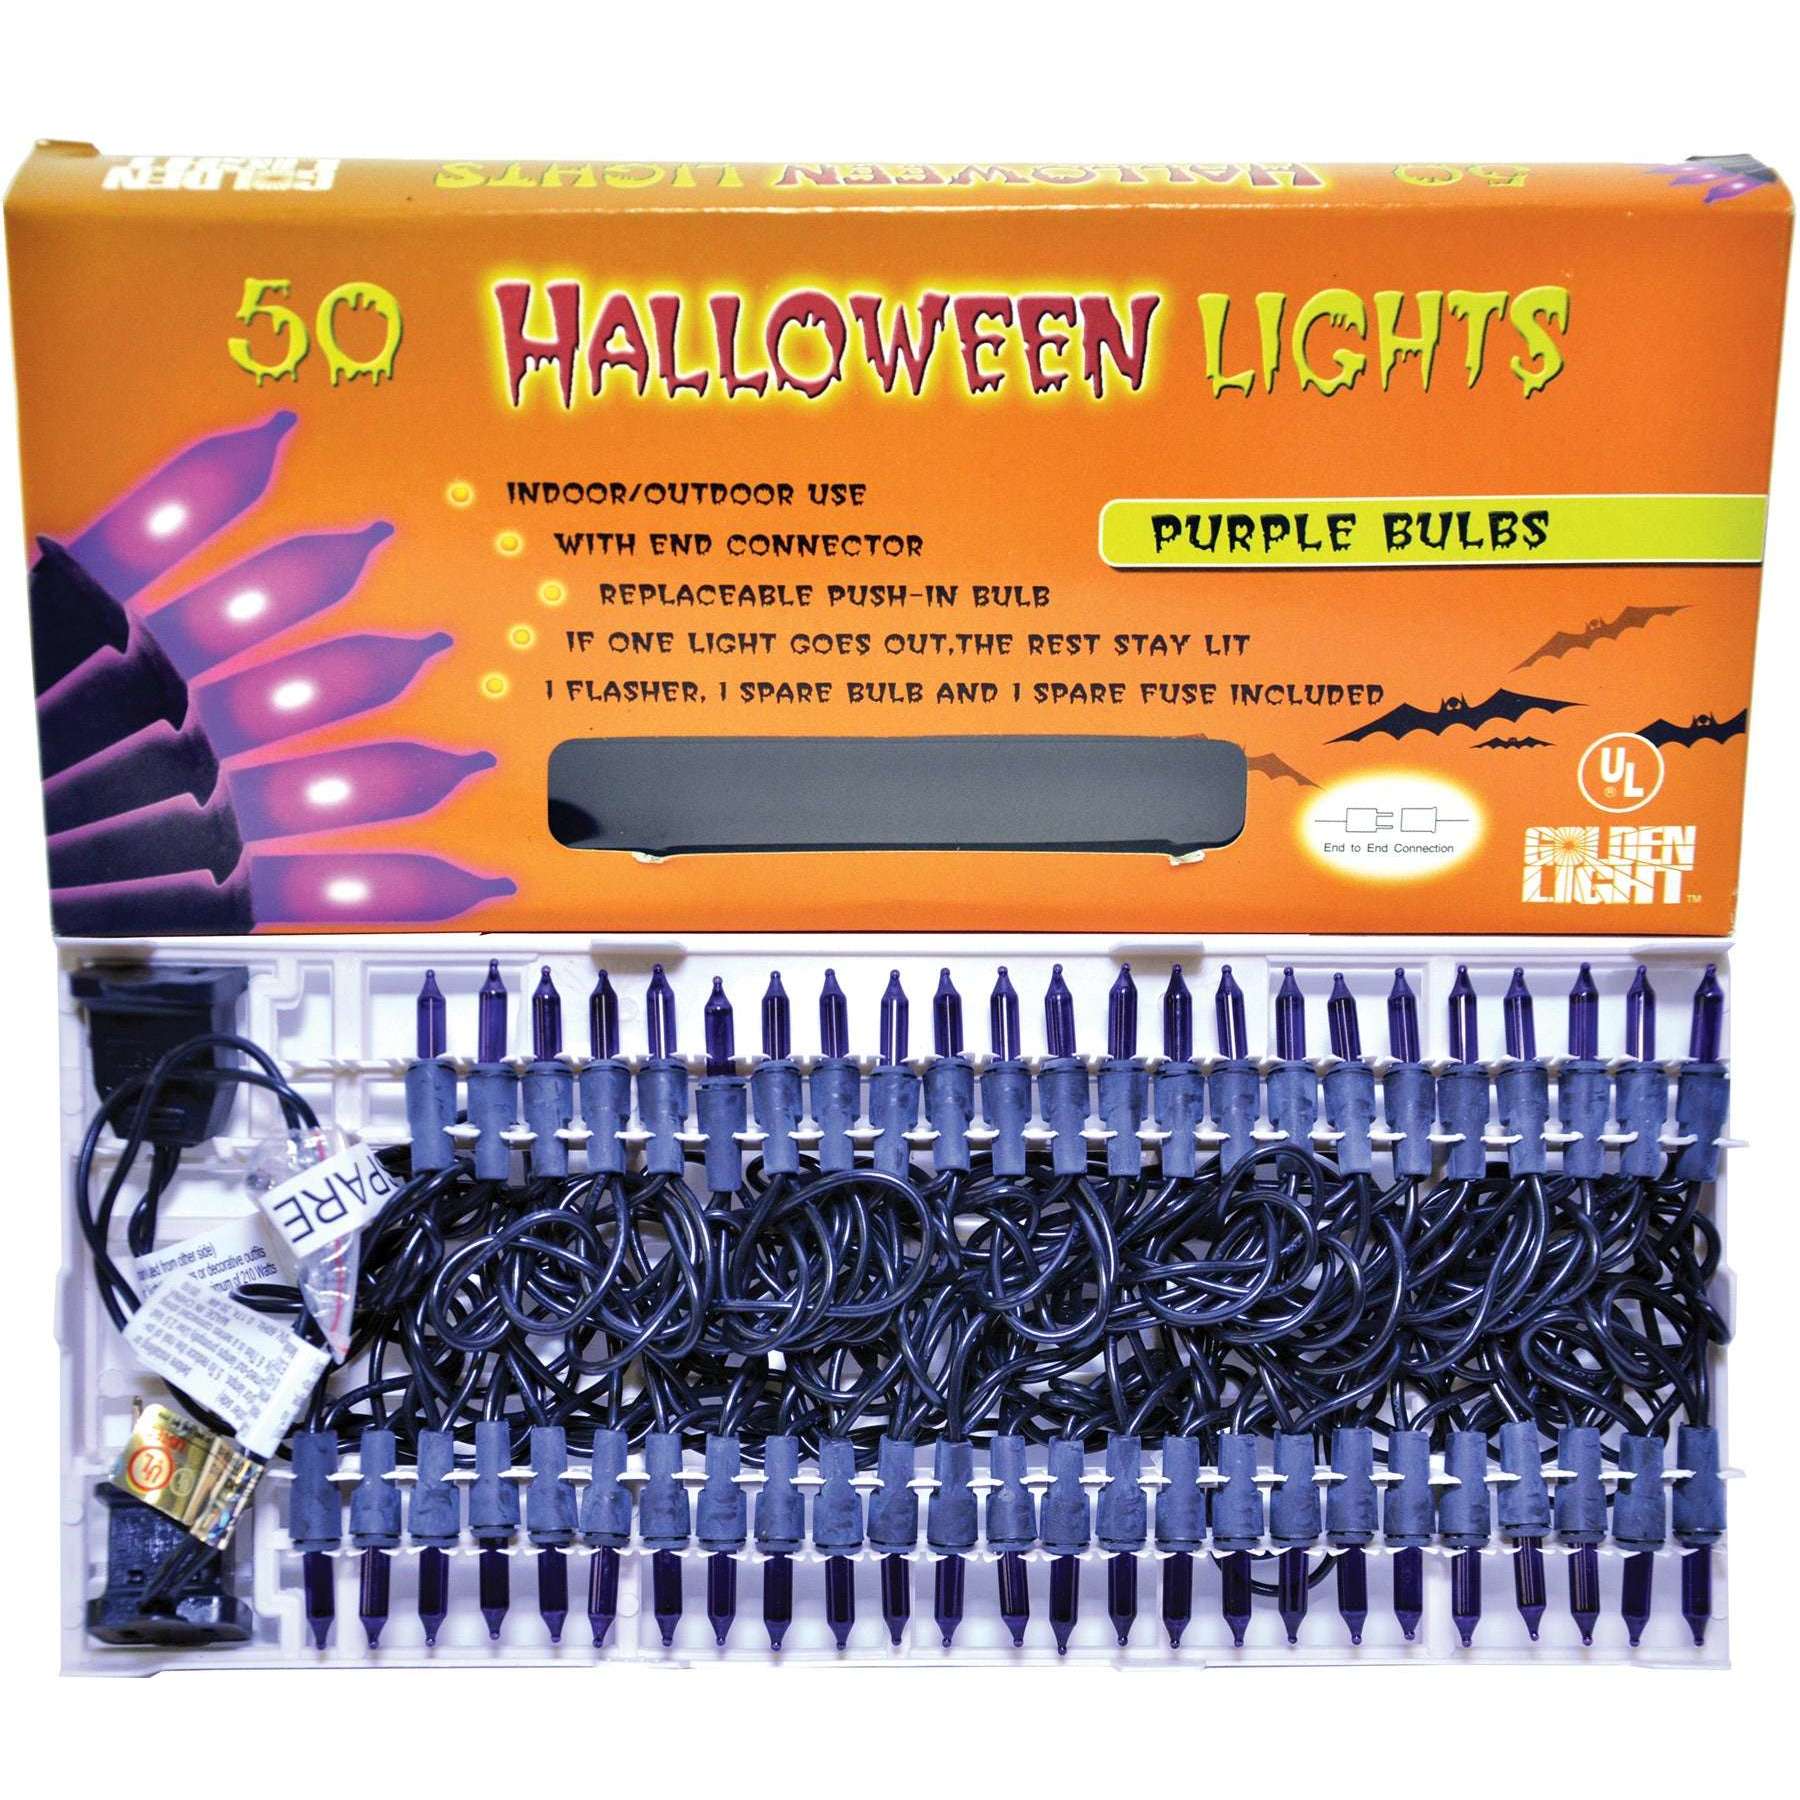 50-Count Purple Halloween Lights with Connector